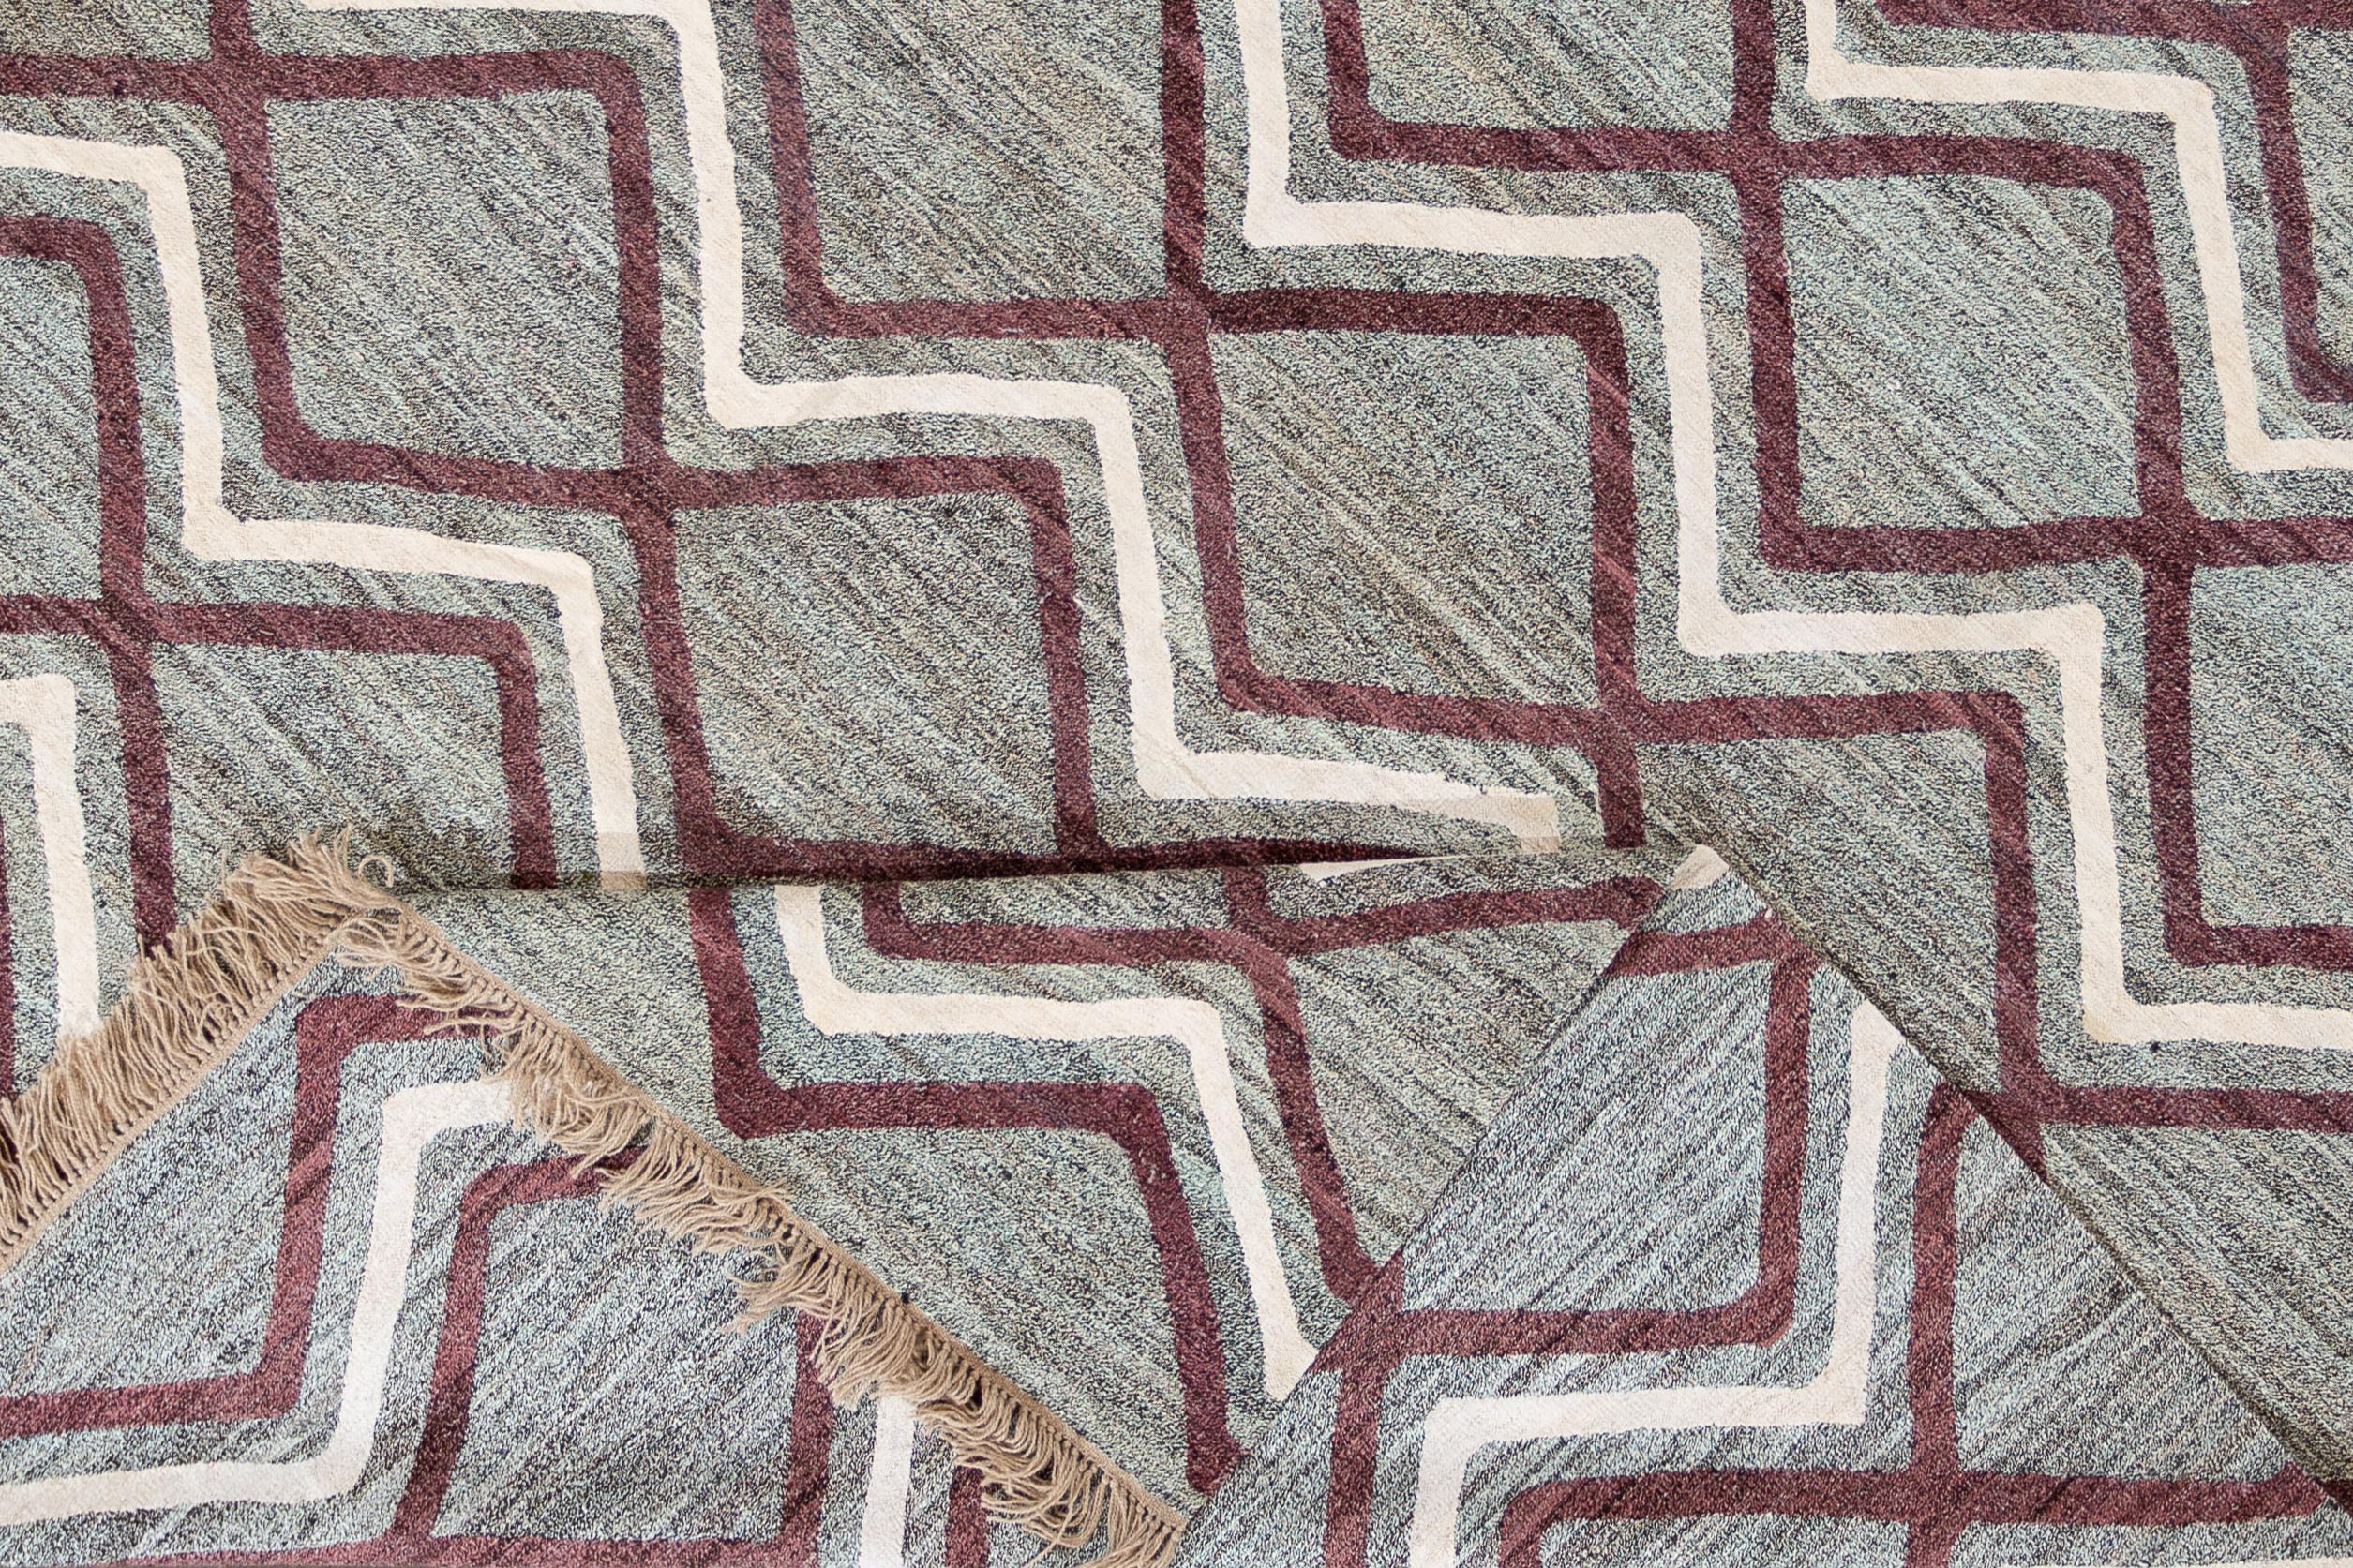 Beautiful hand knotted vintage Turkish flat-weave rug with a silver field and a geometric, horizontal striped pattern in violet and white.

This rug measures: 9'4